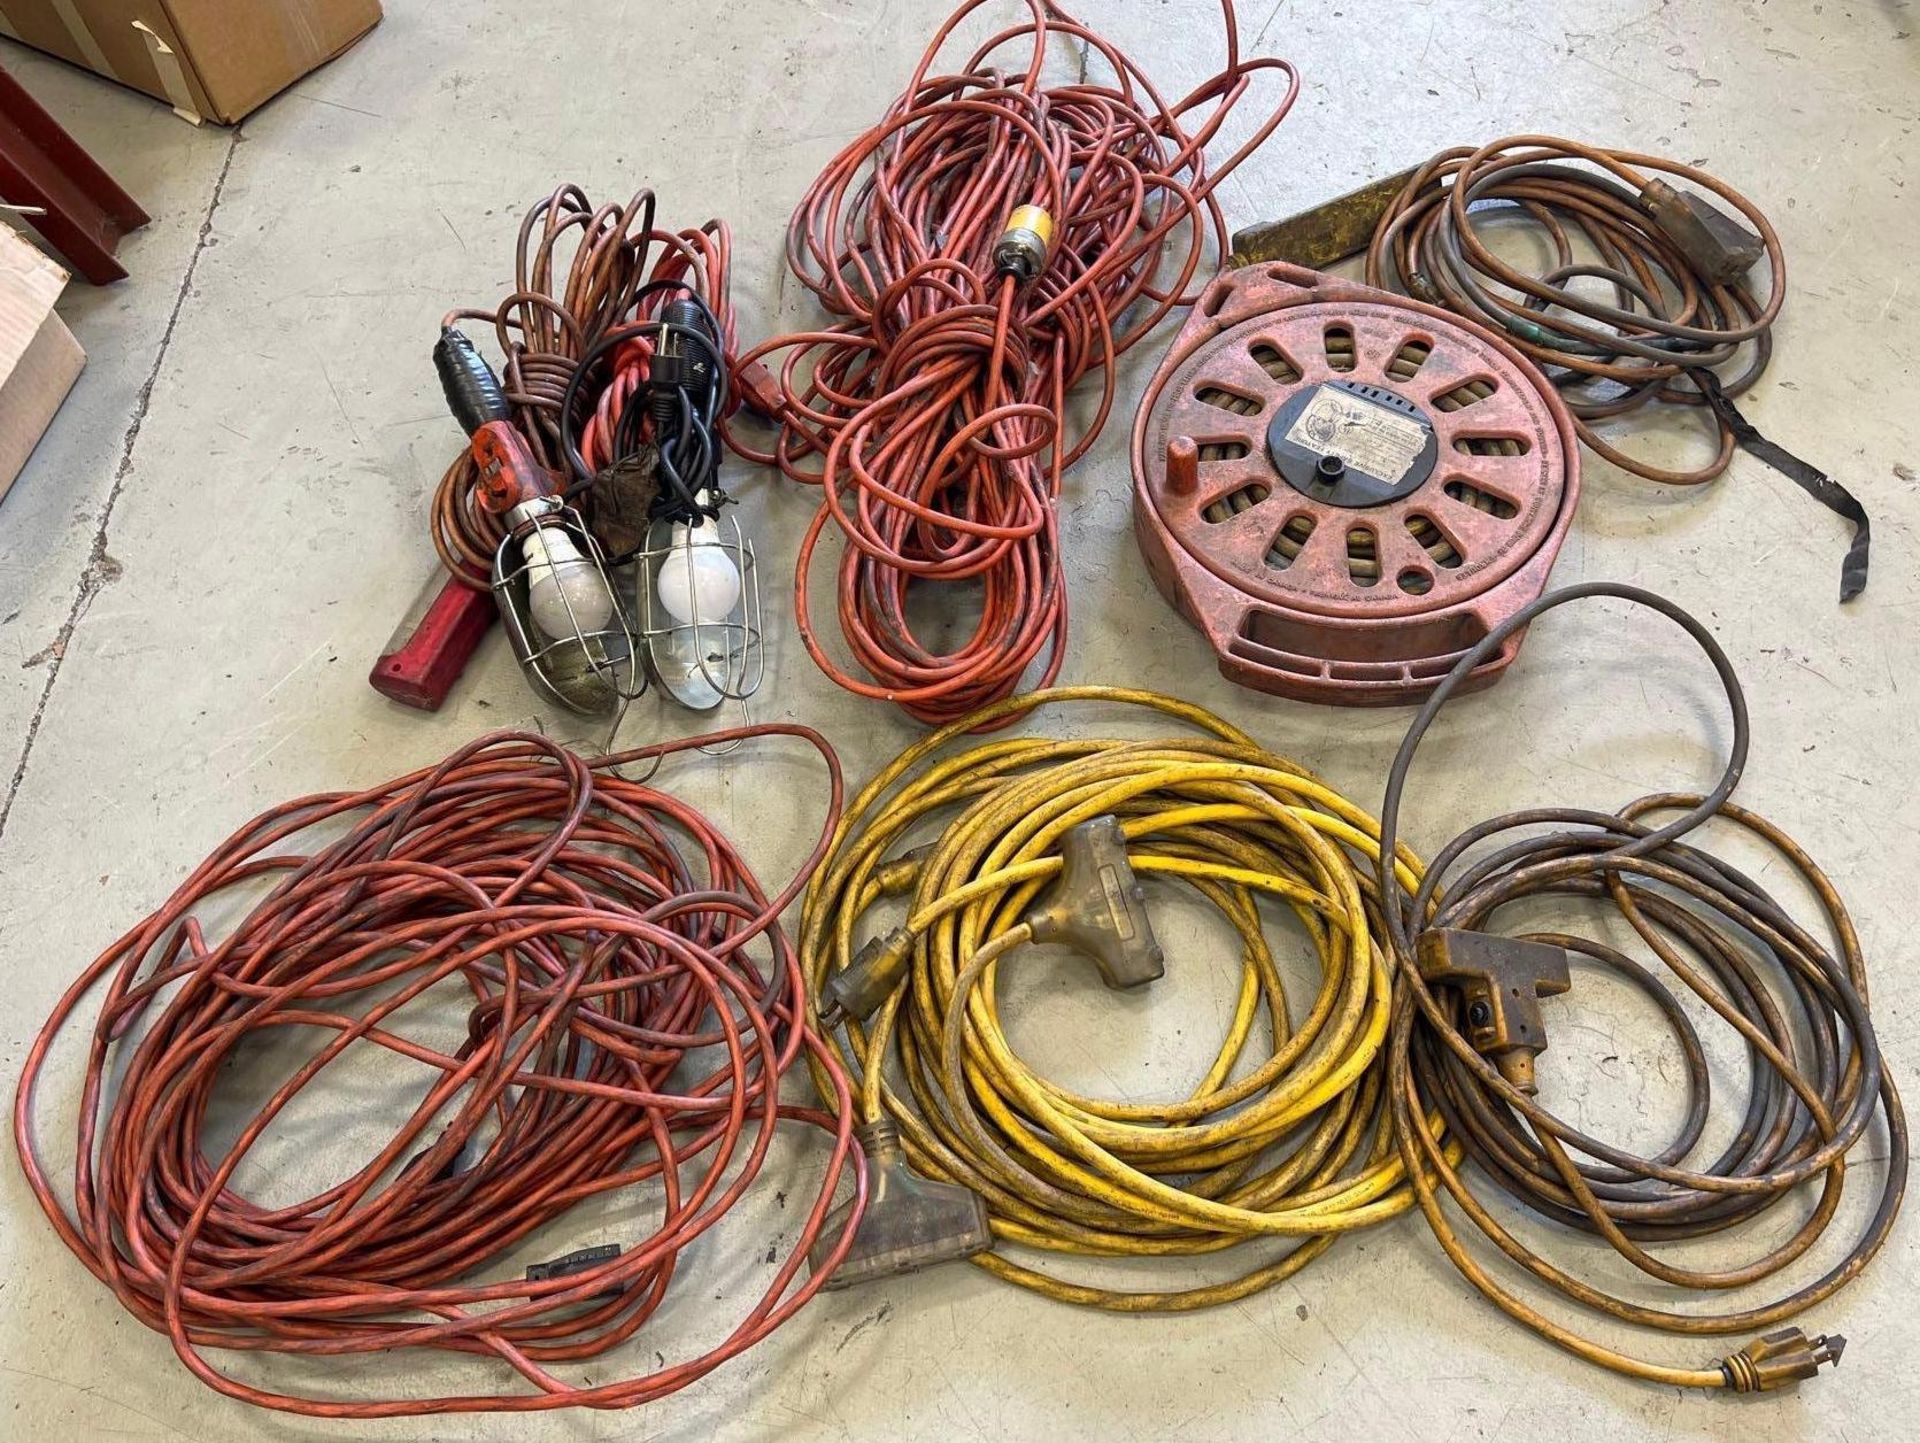 Lot of Misc. Electric Extensions Cords & Work Lights